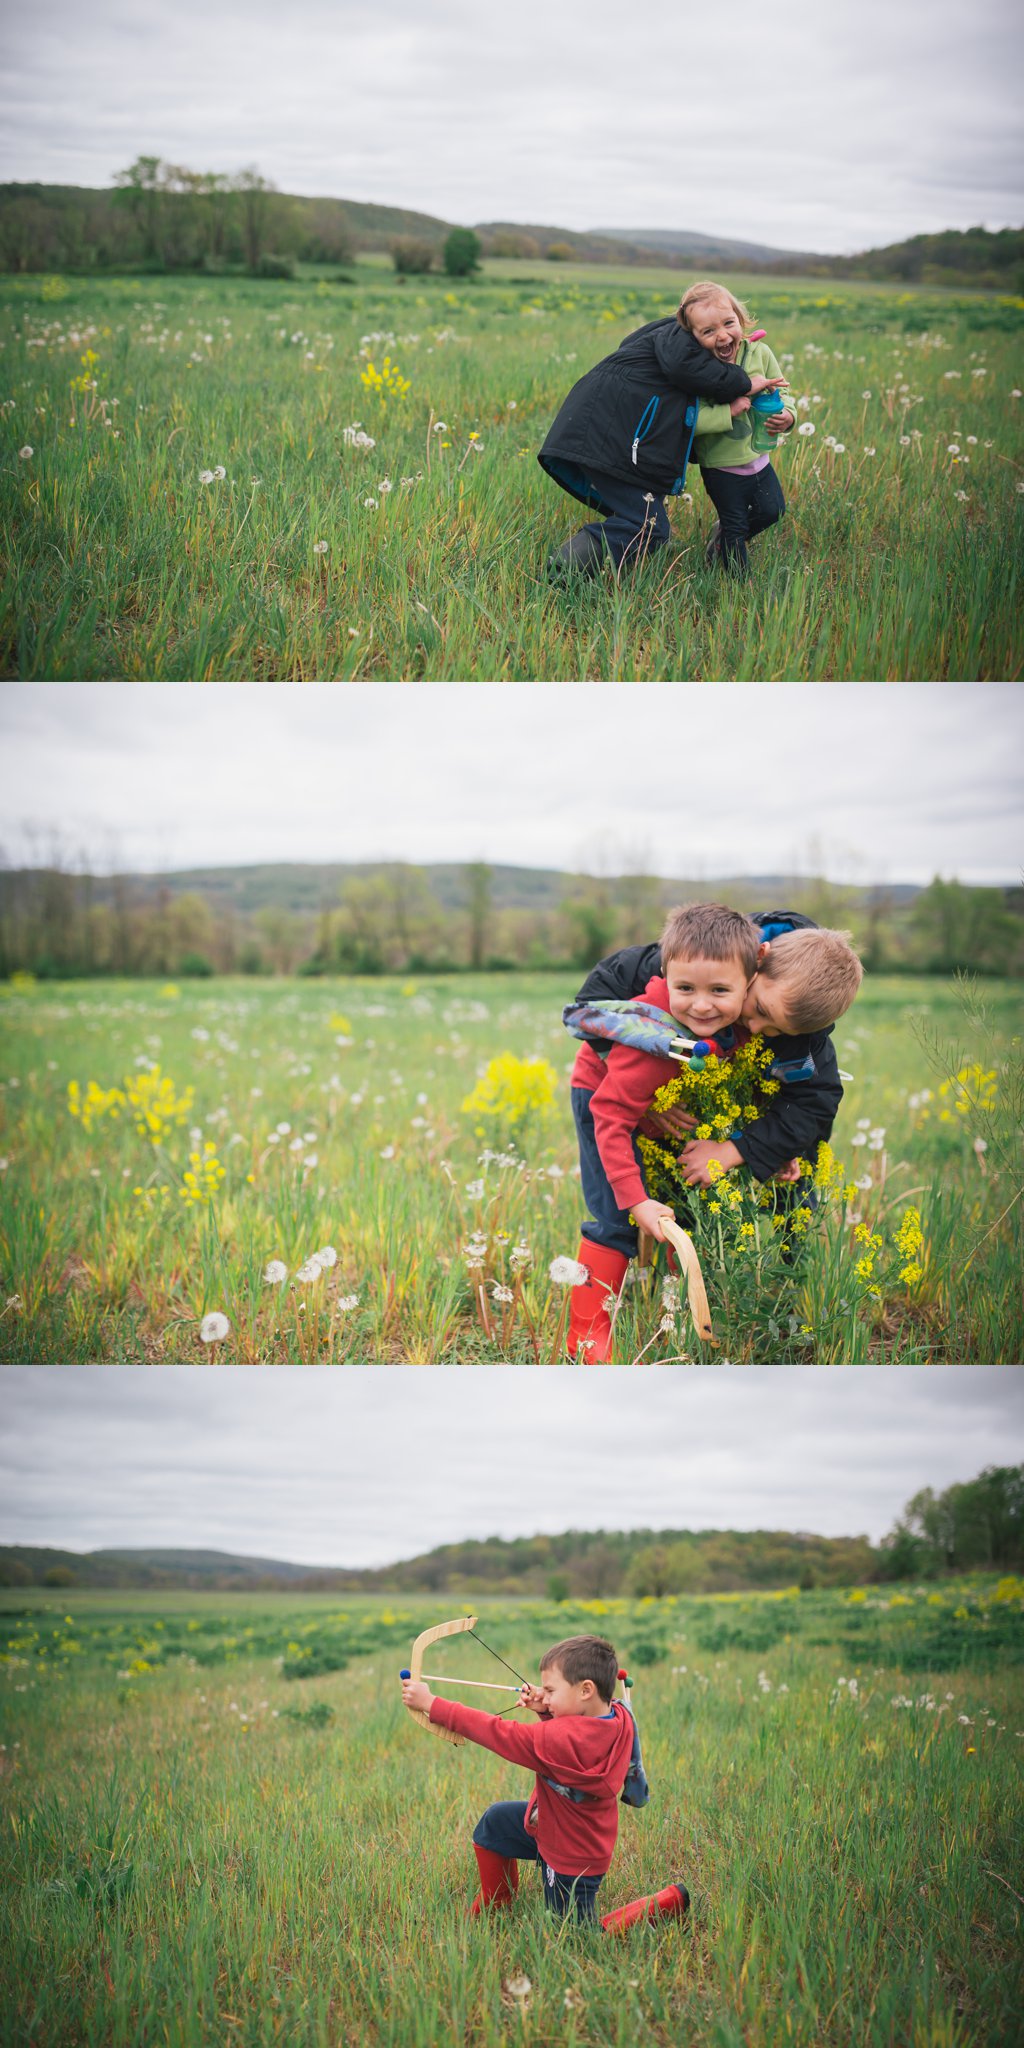  Romping in the fields of wildflowers. Our days are so so full.&nbsp; 